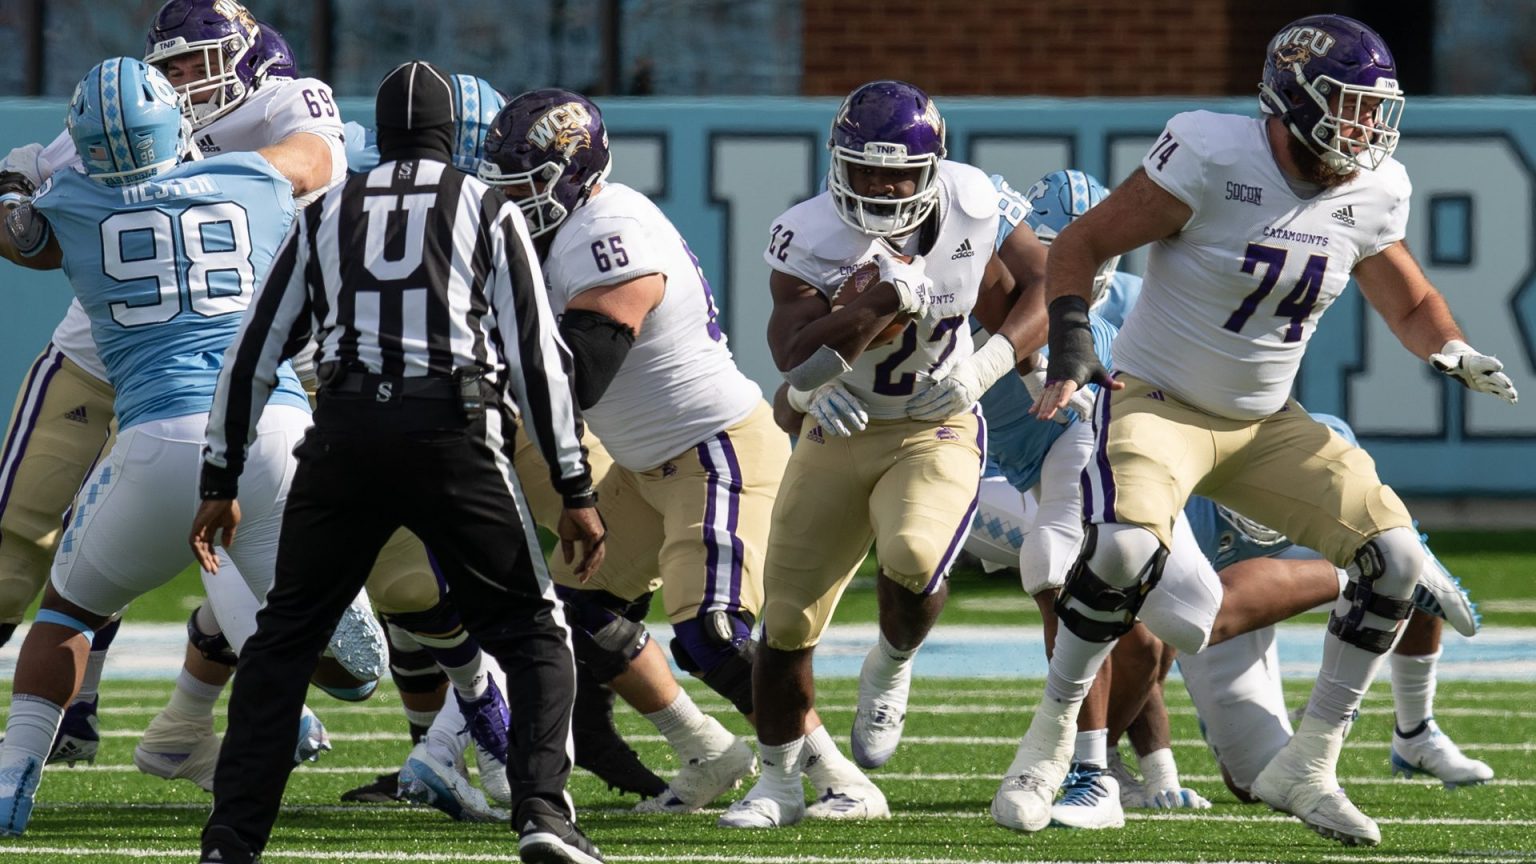 2021 Fcs Season Preview Western Carolina The College Sports Journal 6659